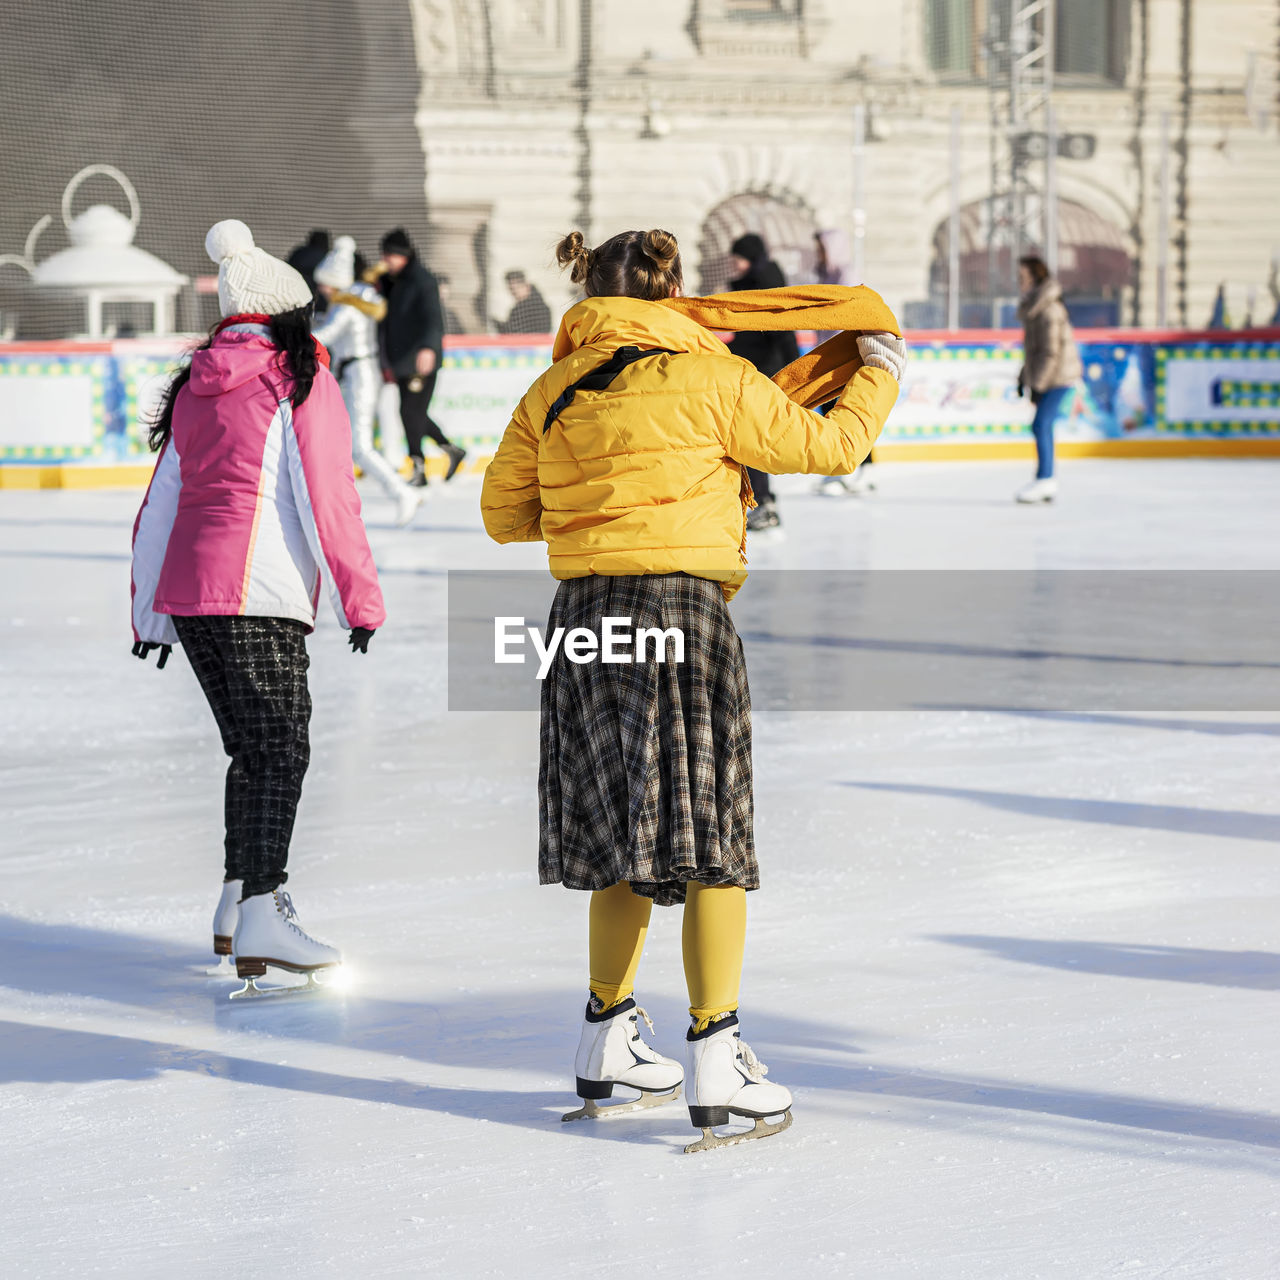 ice rink, winter sports, winter, ice skating, ice, cold temperature, full length, architecture, women, sports, child, group of people, childhood, skating, ice skate, snow, clothing, travel destinations, city, footwear, leisure activity, adult, sports equipment, female, lifestyles, day, built structure, recreation, building exterior, tourism, togetherness, person